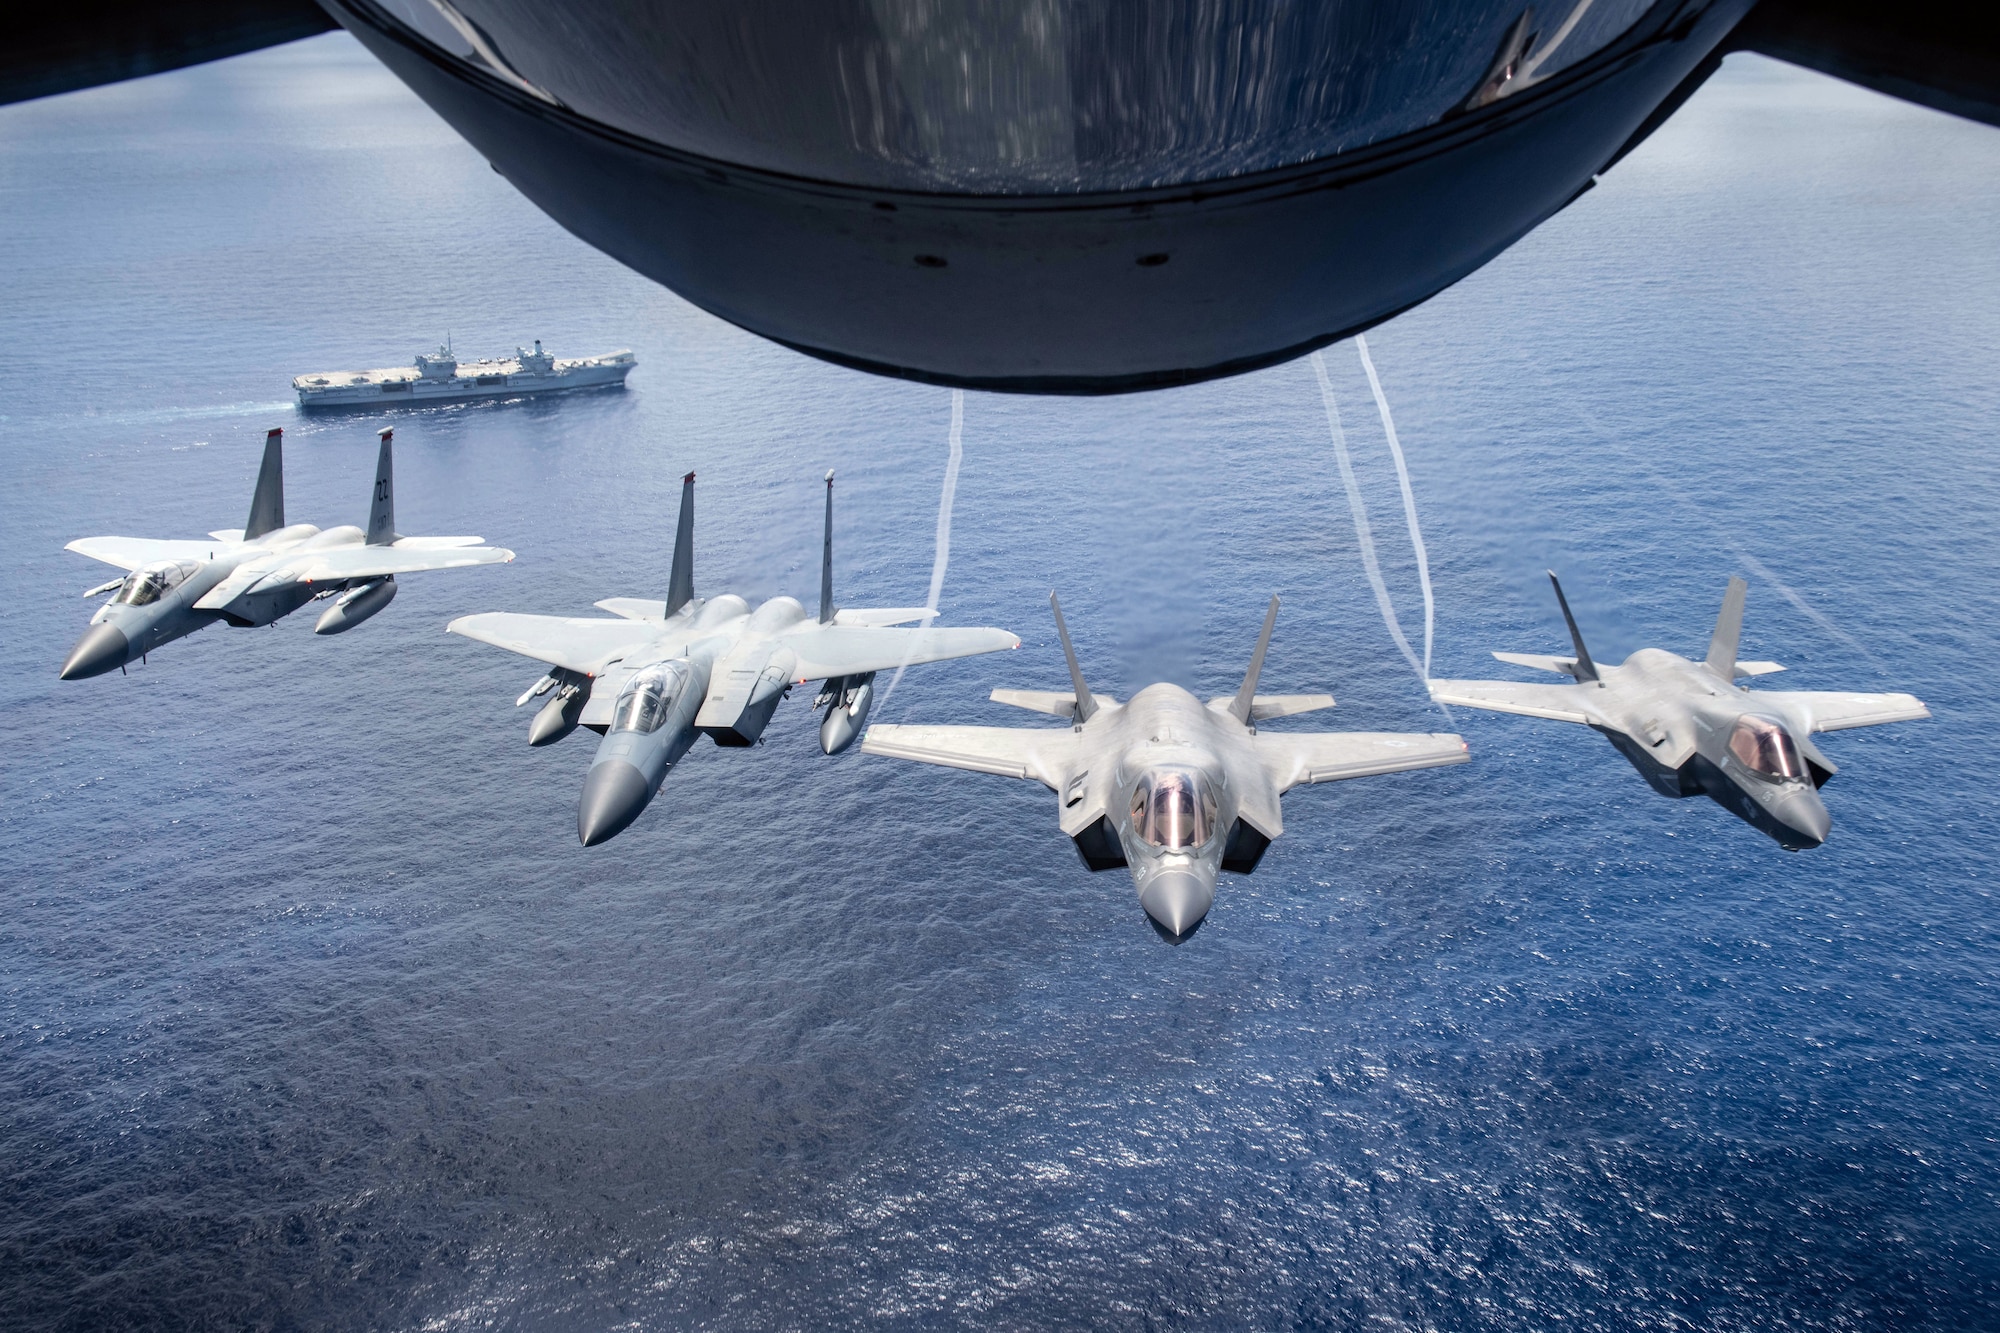 Two U.S. Marine Attack Squadron 211 F-35B Lightning IIs and two U.S. Air Force F-15 Eagles assigned to the 67th Fighter Squadron, fly over United Kingdom aircraft carrier HMS Queen Elizabeth over the west Indo-Pacific region